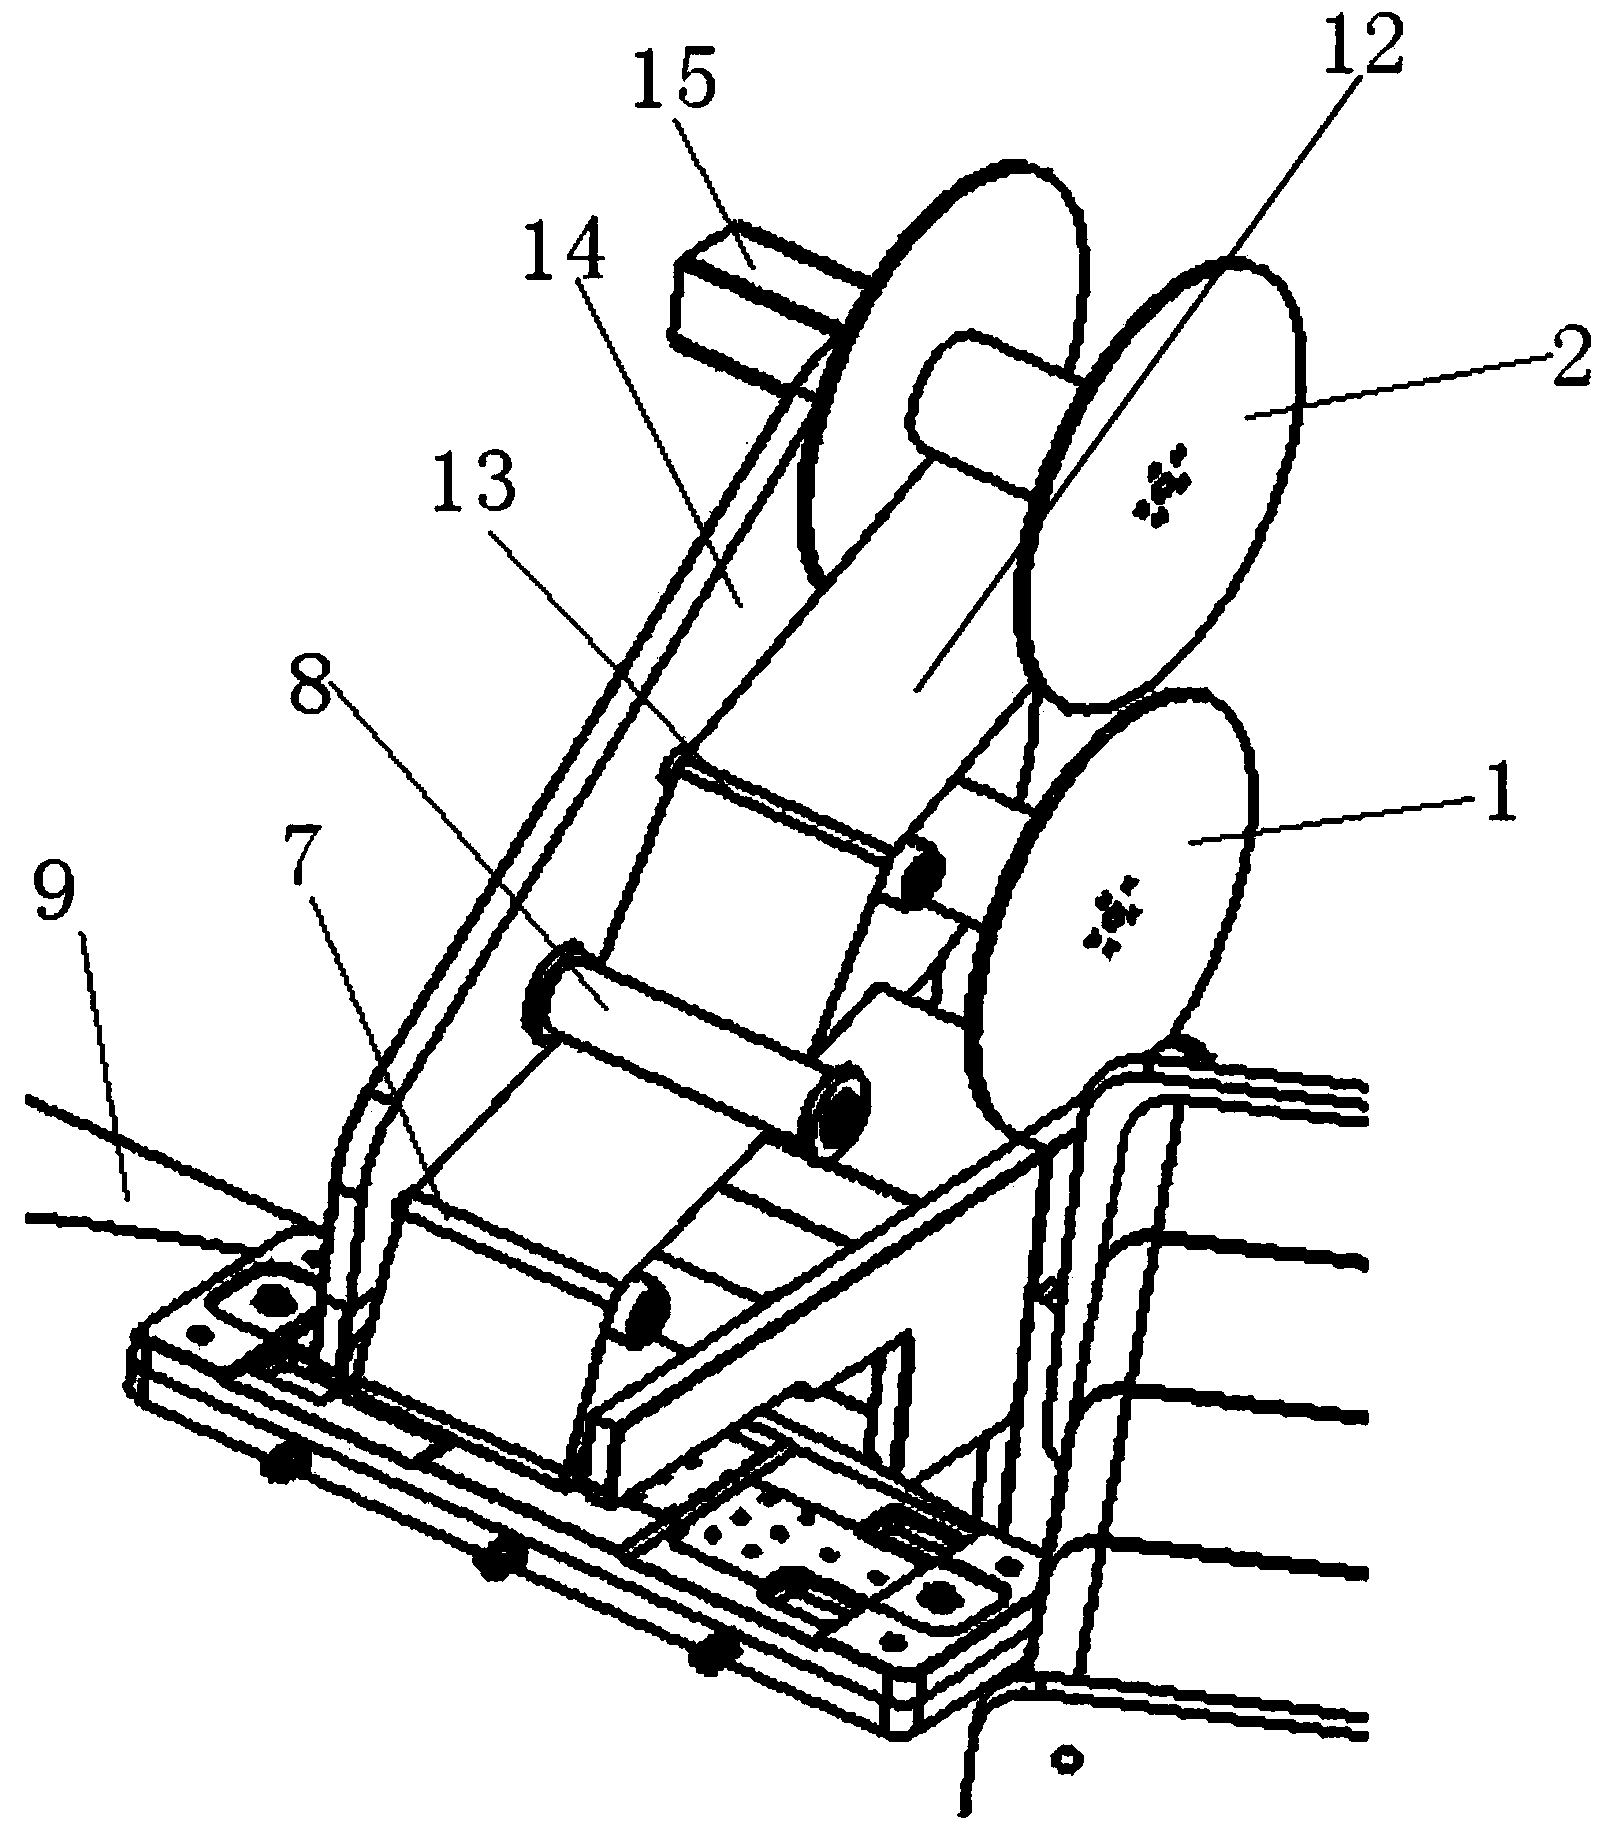 Lift support type release paper fit device